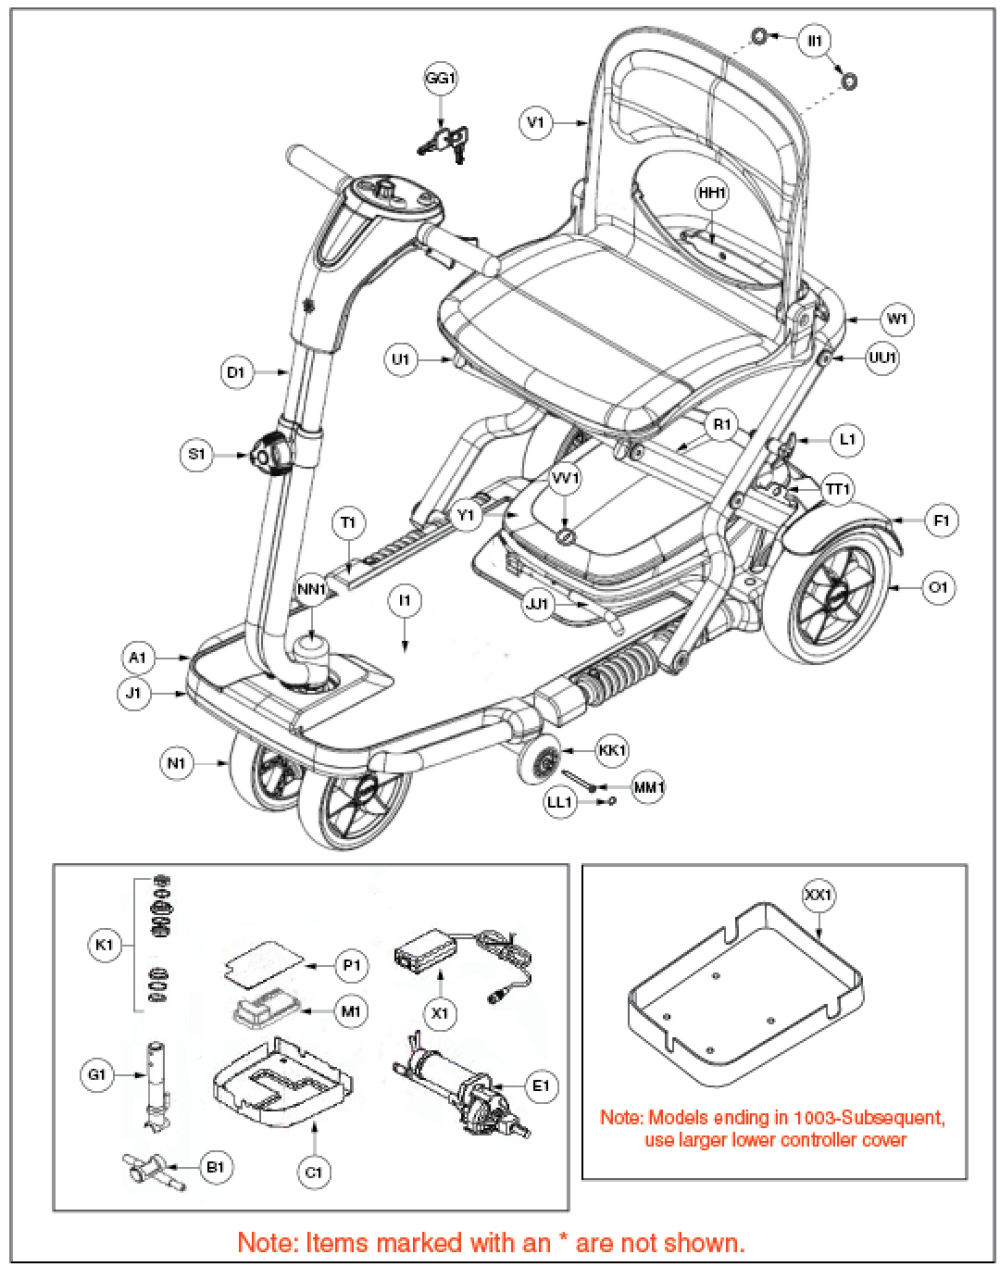 Folding Scooter W/ Lithium Battery Pack, Gogo S19 parts diagram